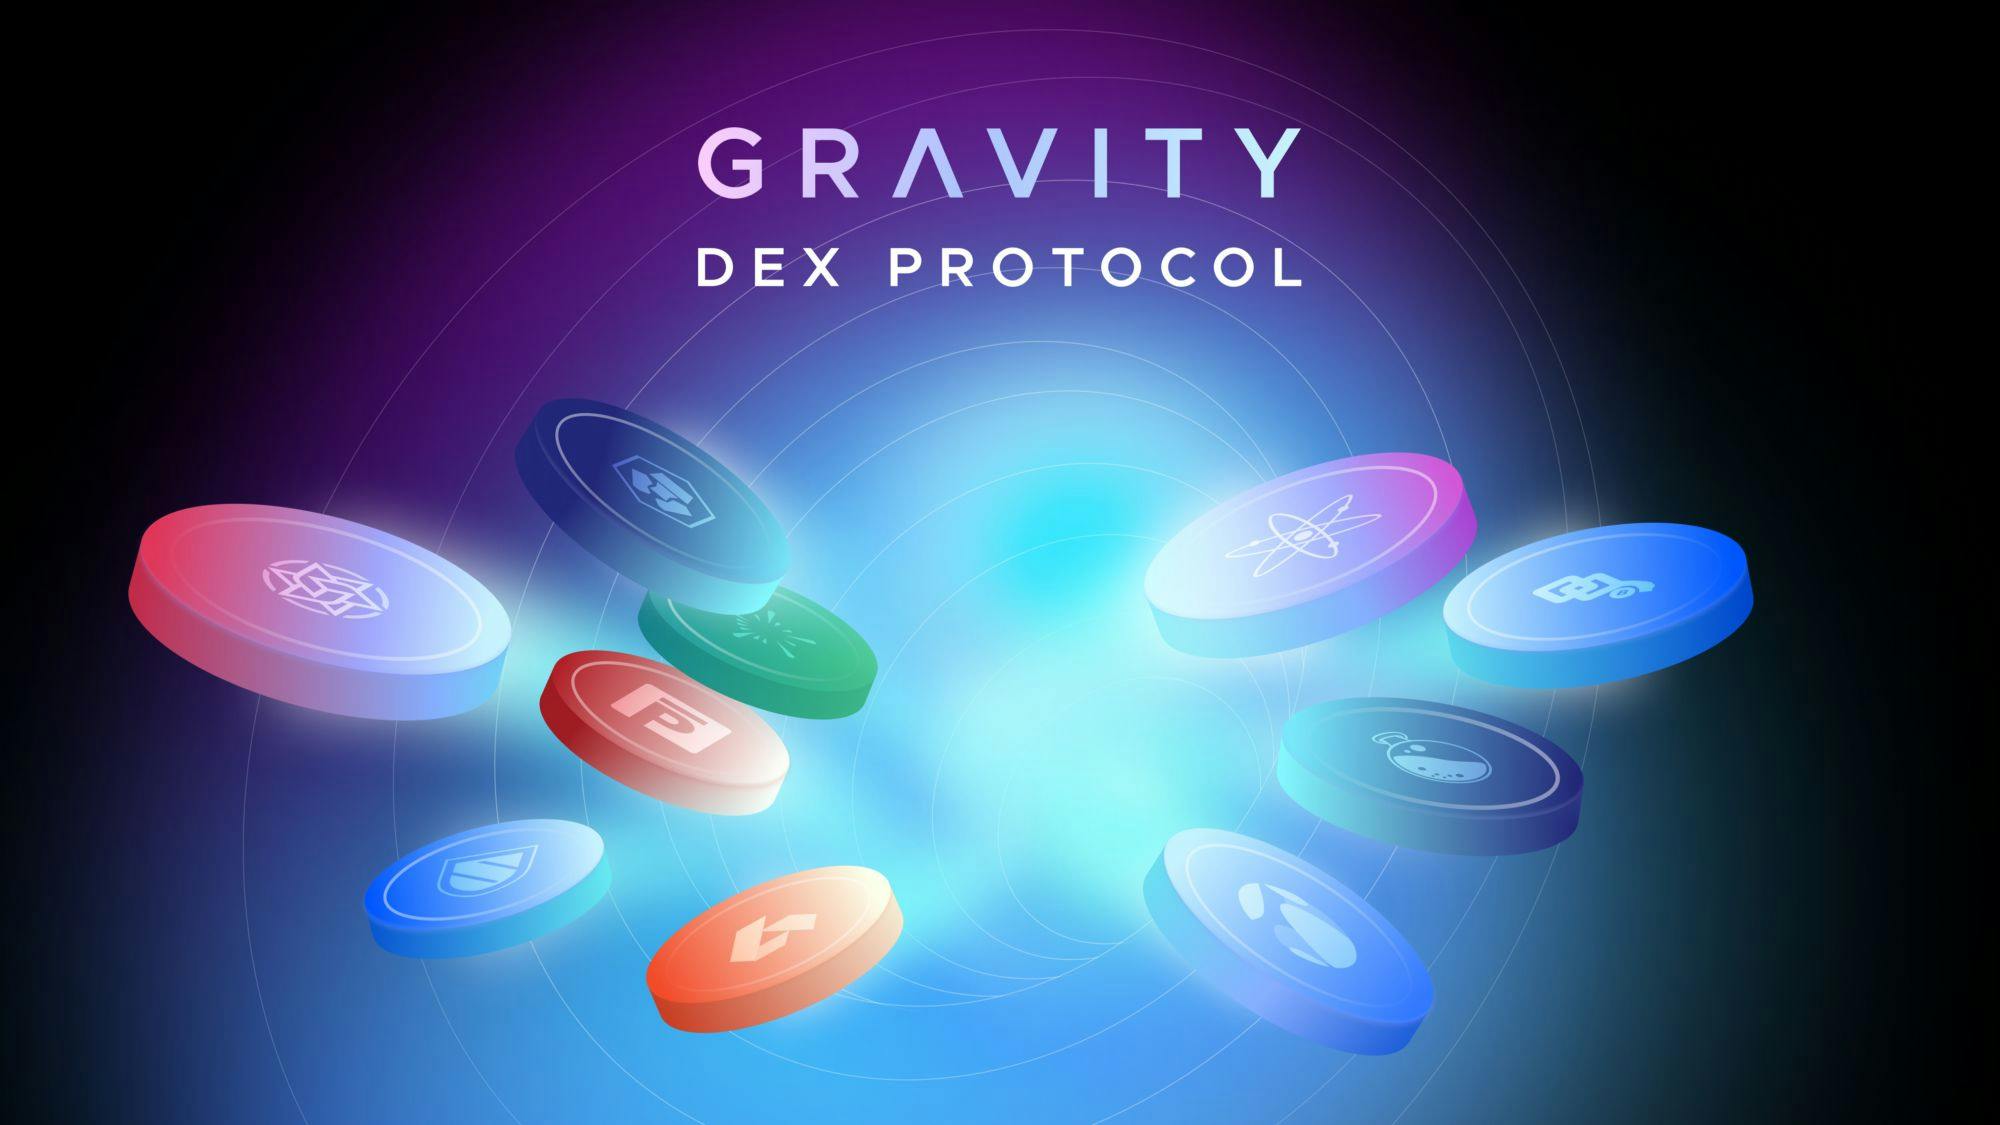 /bringing-defi-to-cosmos-how-the-gravity-dex-protocol-came-to-be feature image